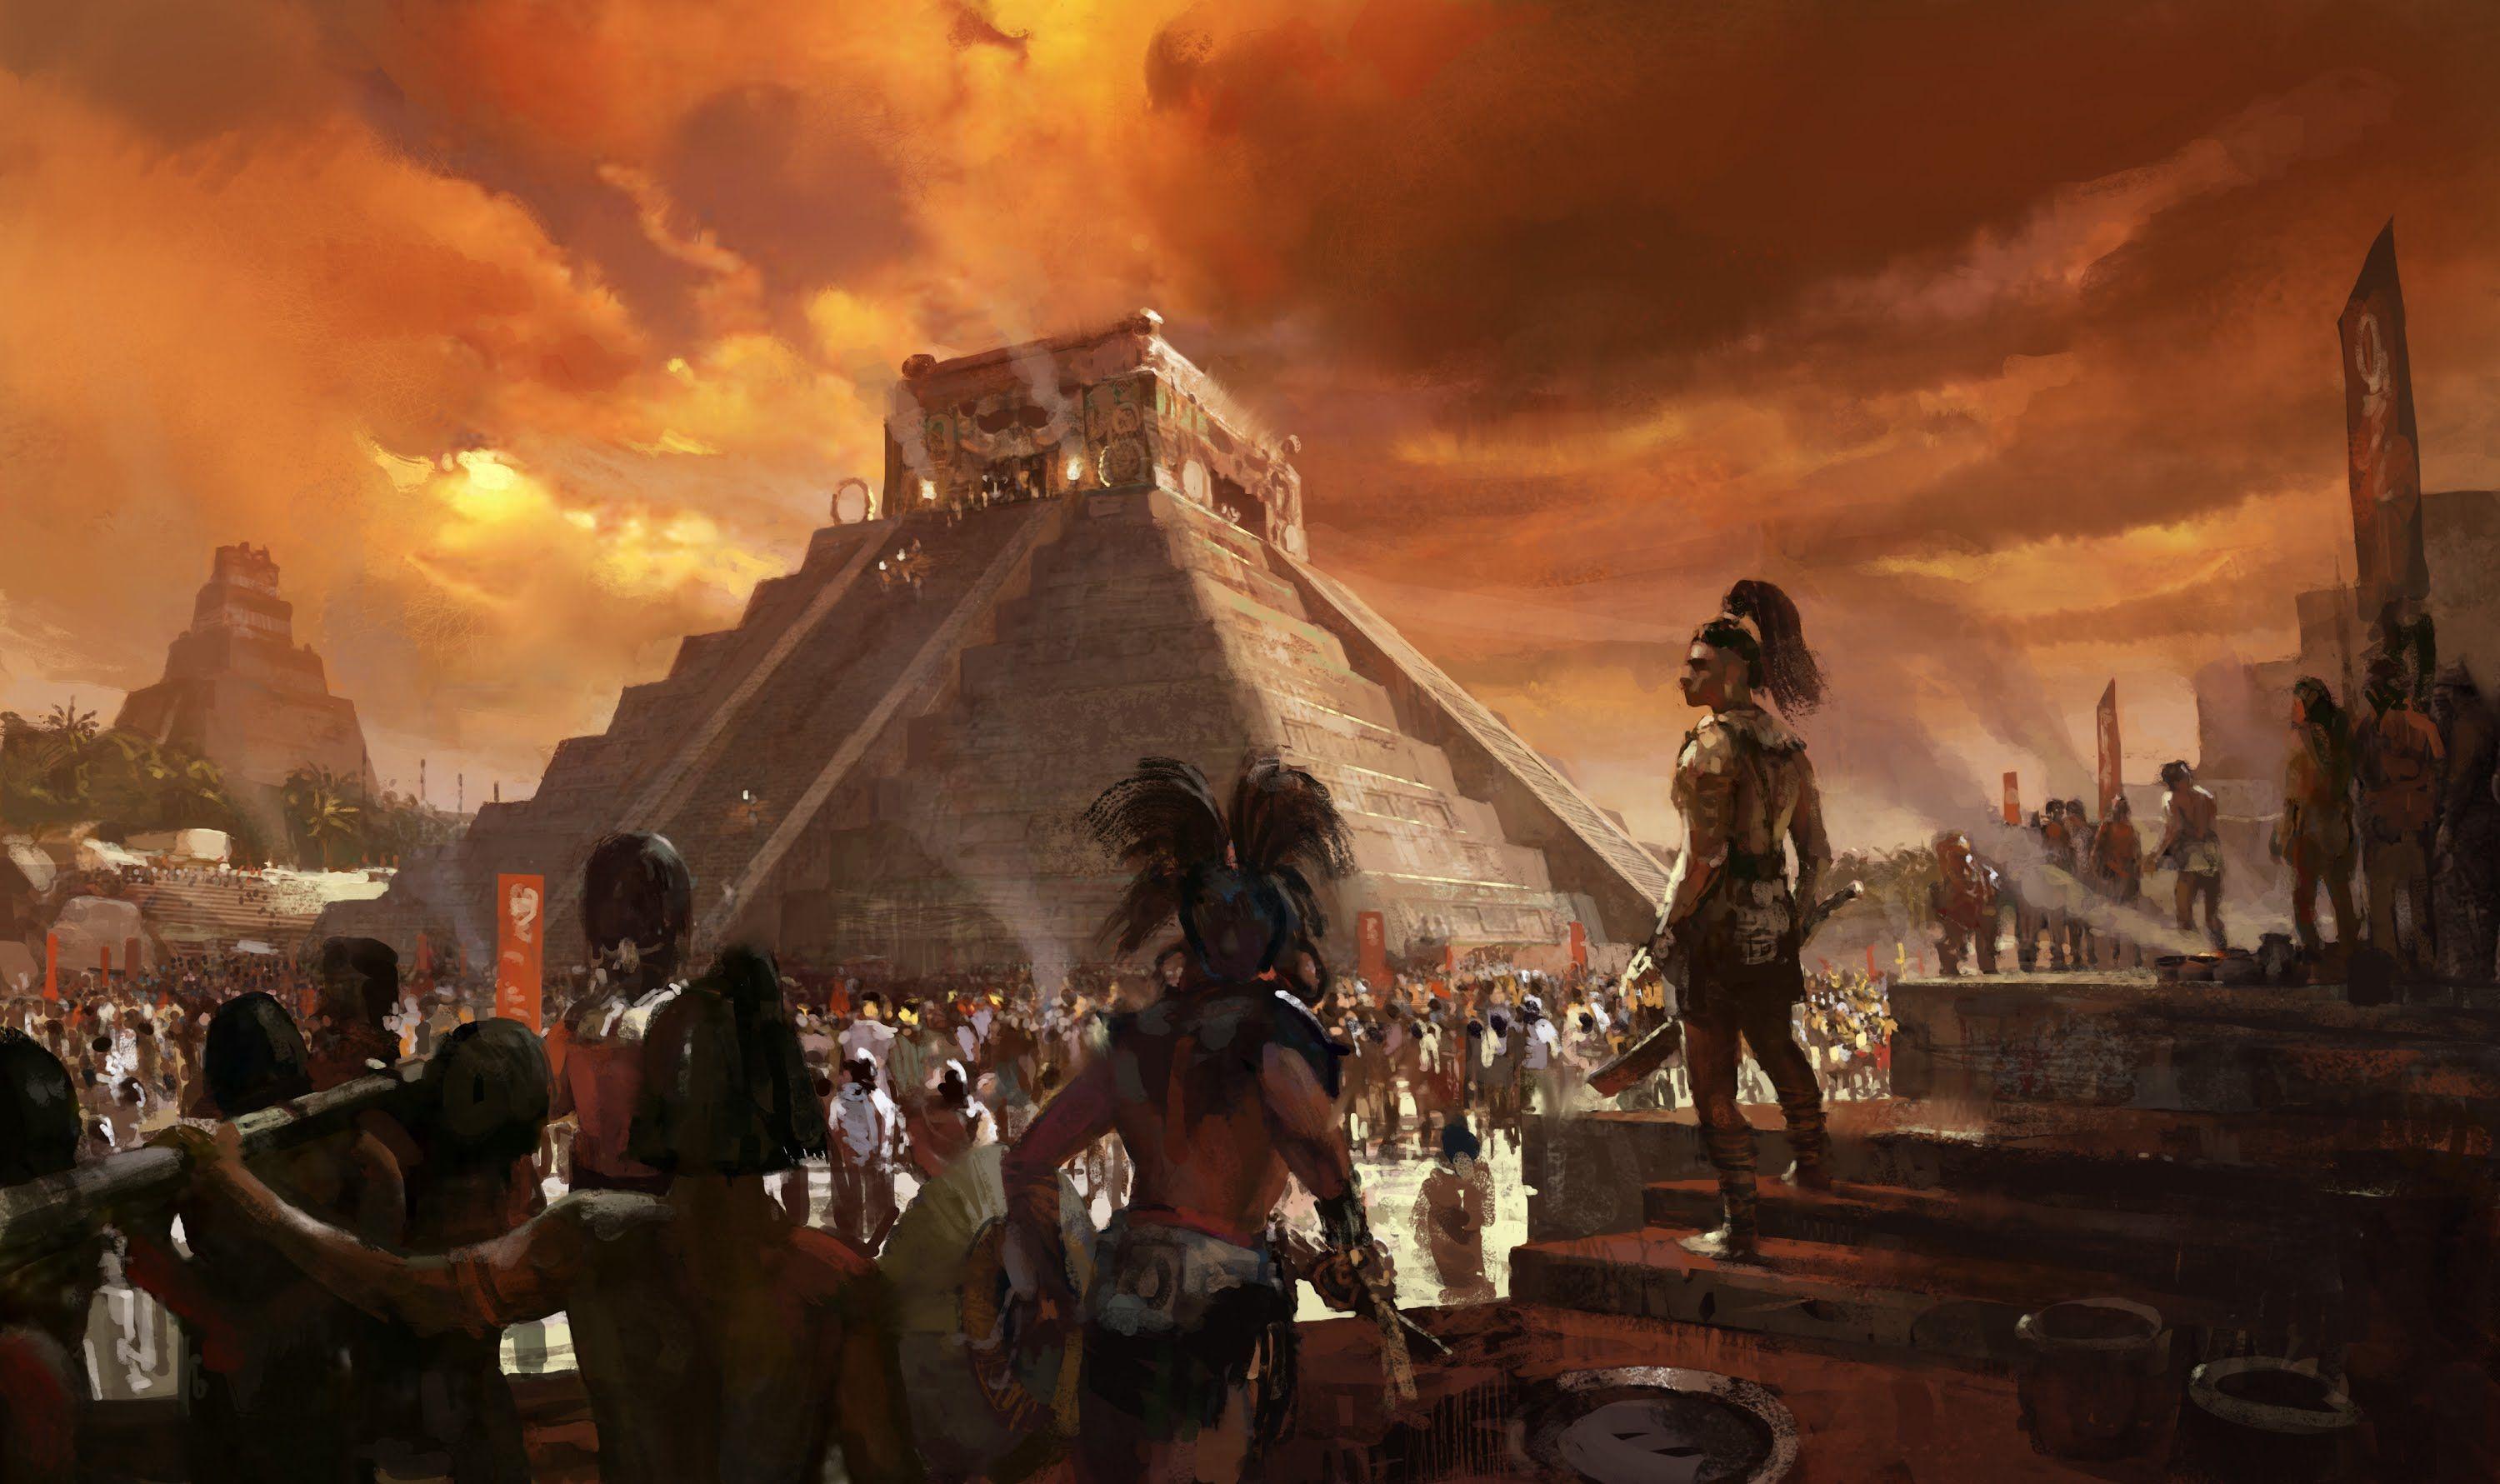 Mysterious Facts about the Mayan Civilization